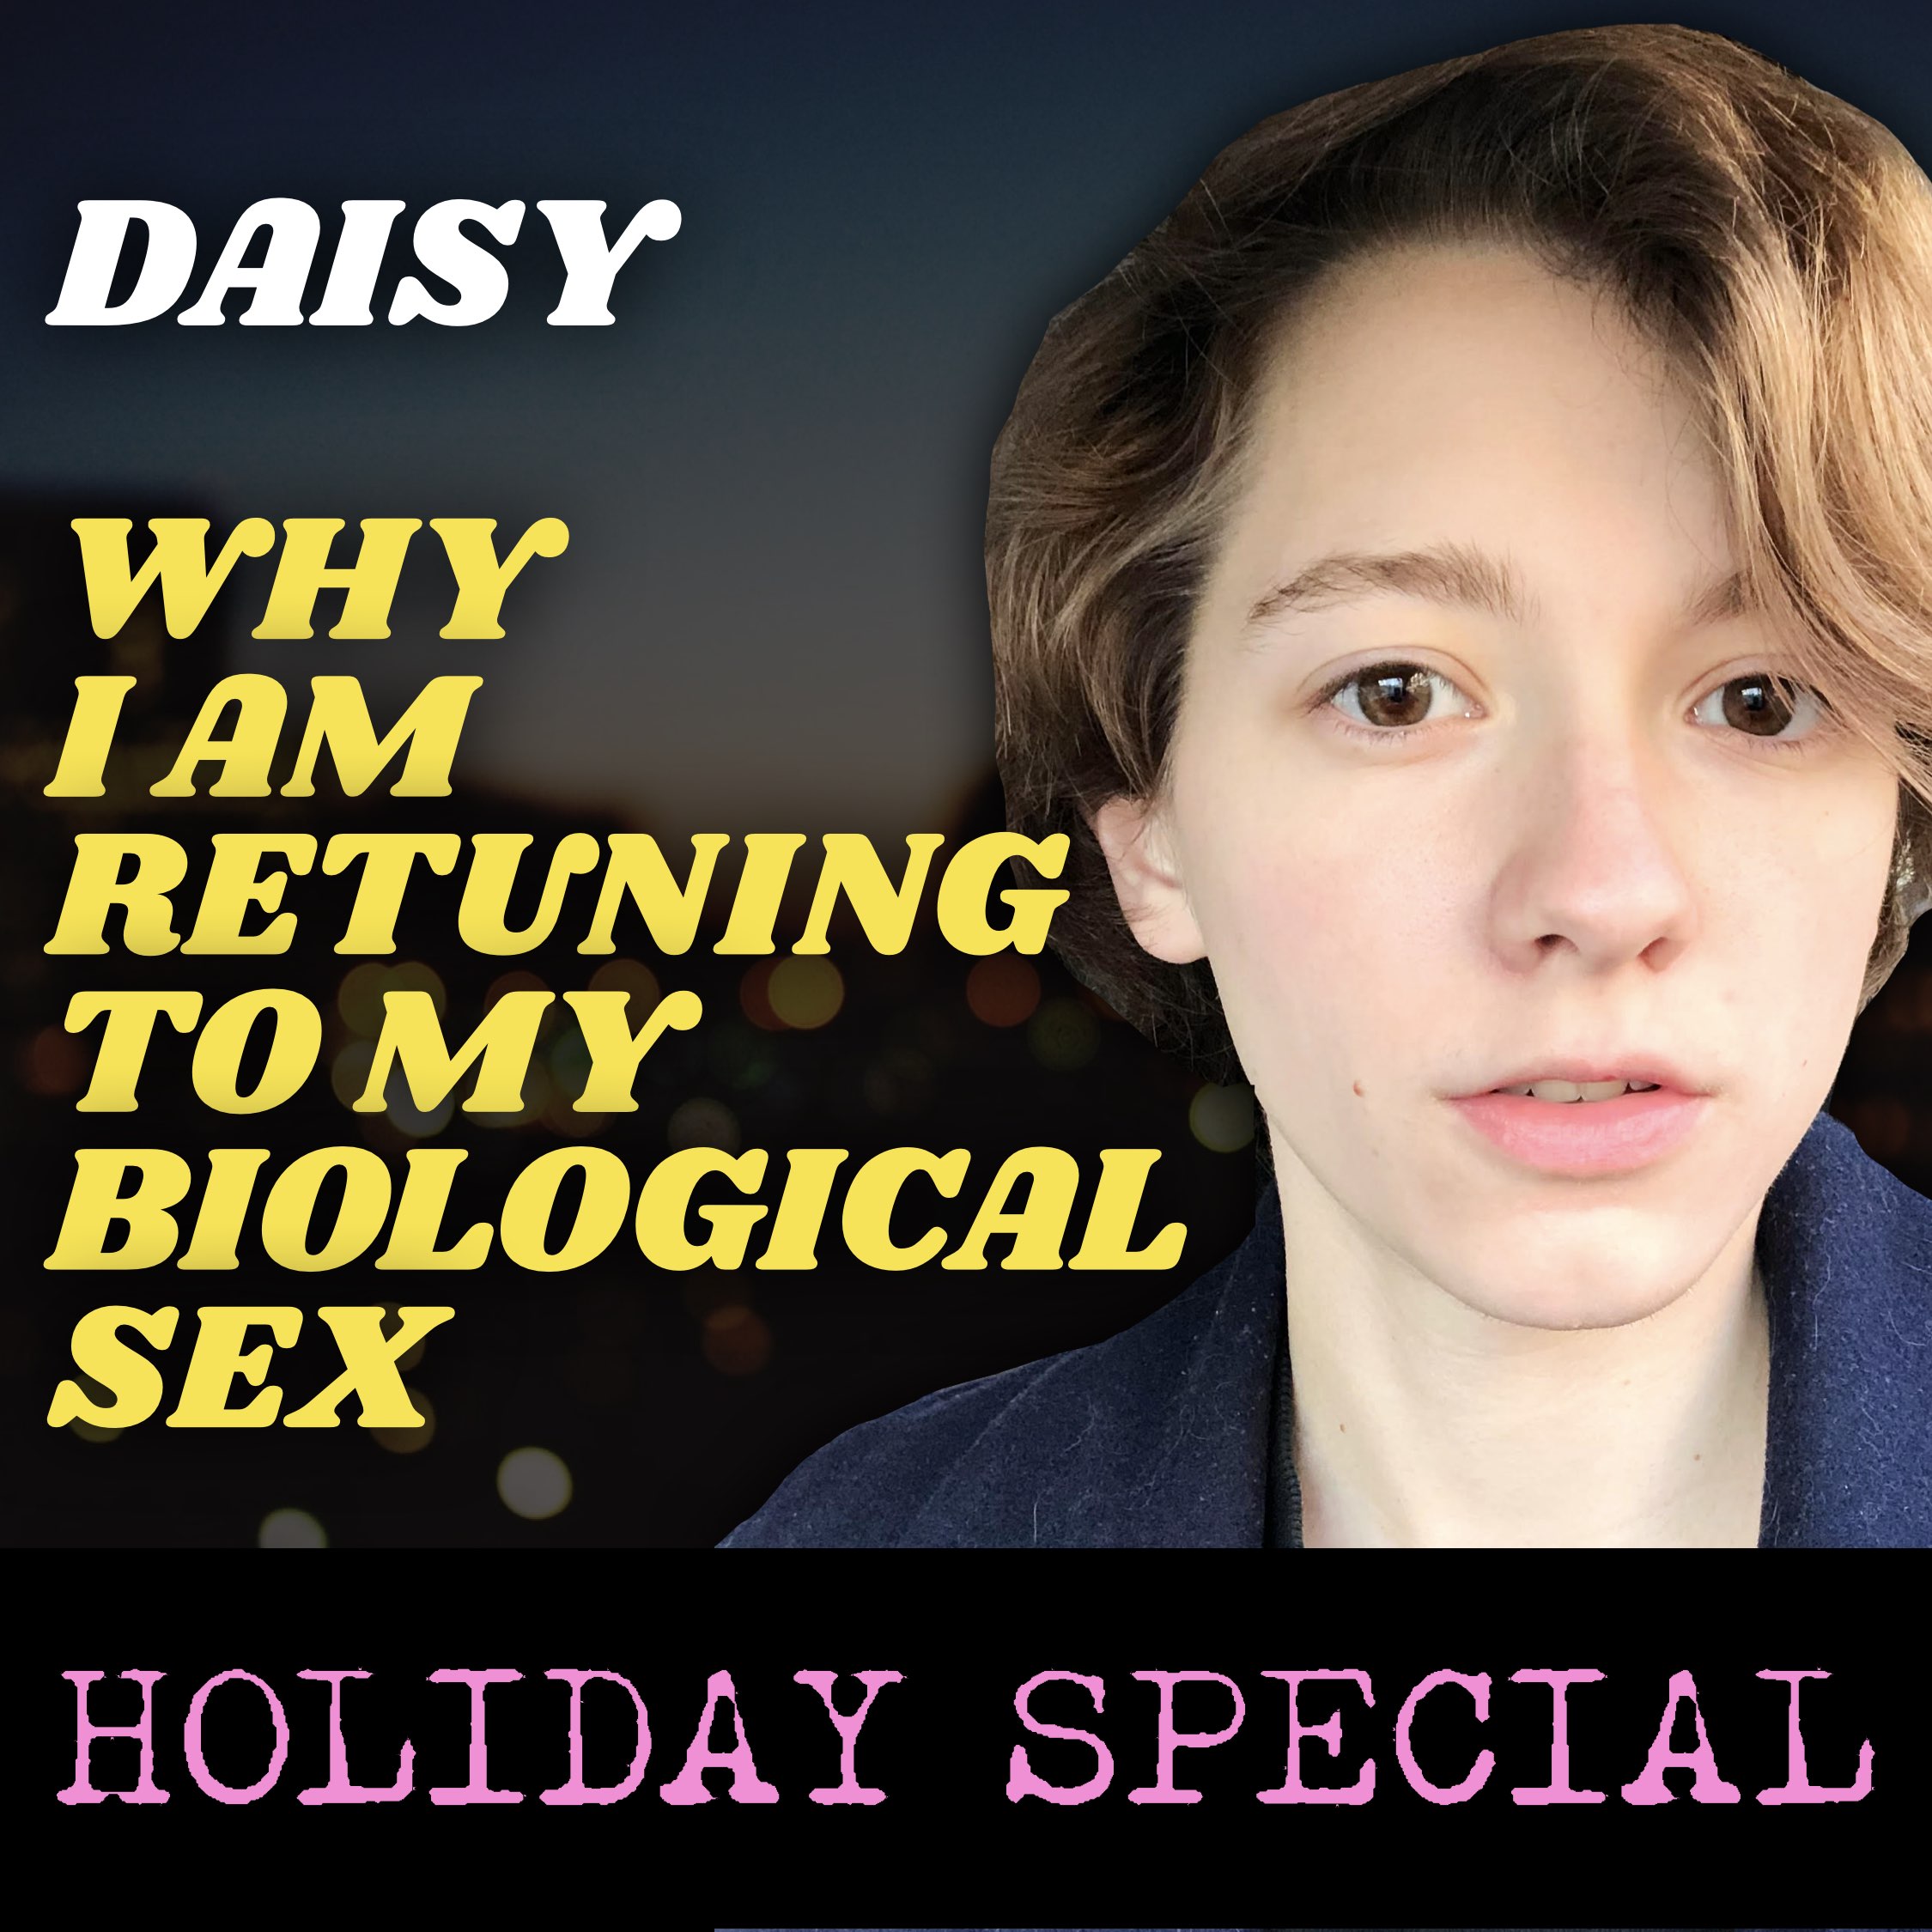 HOLIDAY SPECIAL | Daisy: Why I am De-Transitioning Back to my Biological Sex